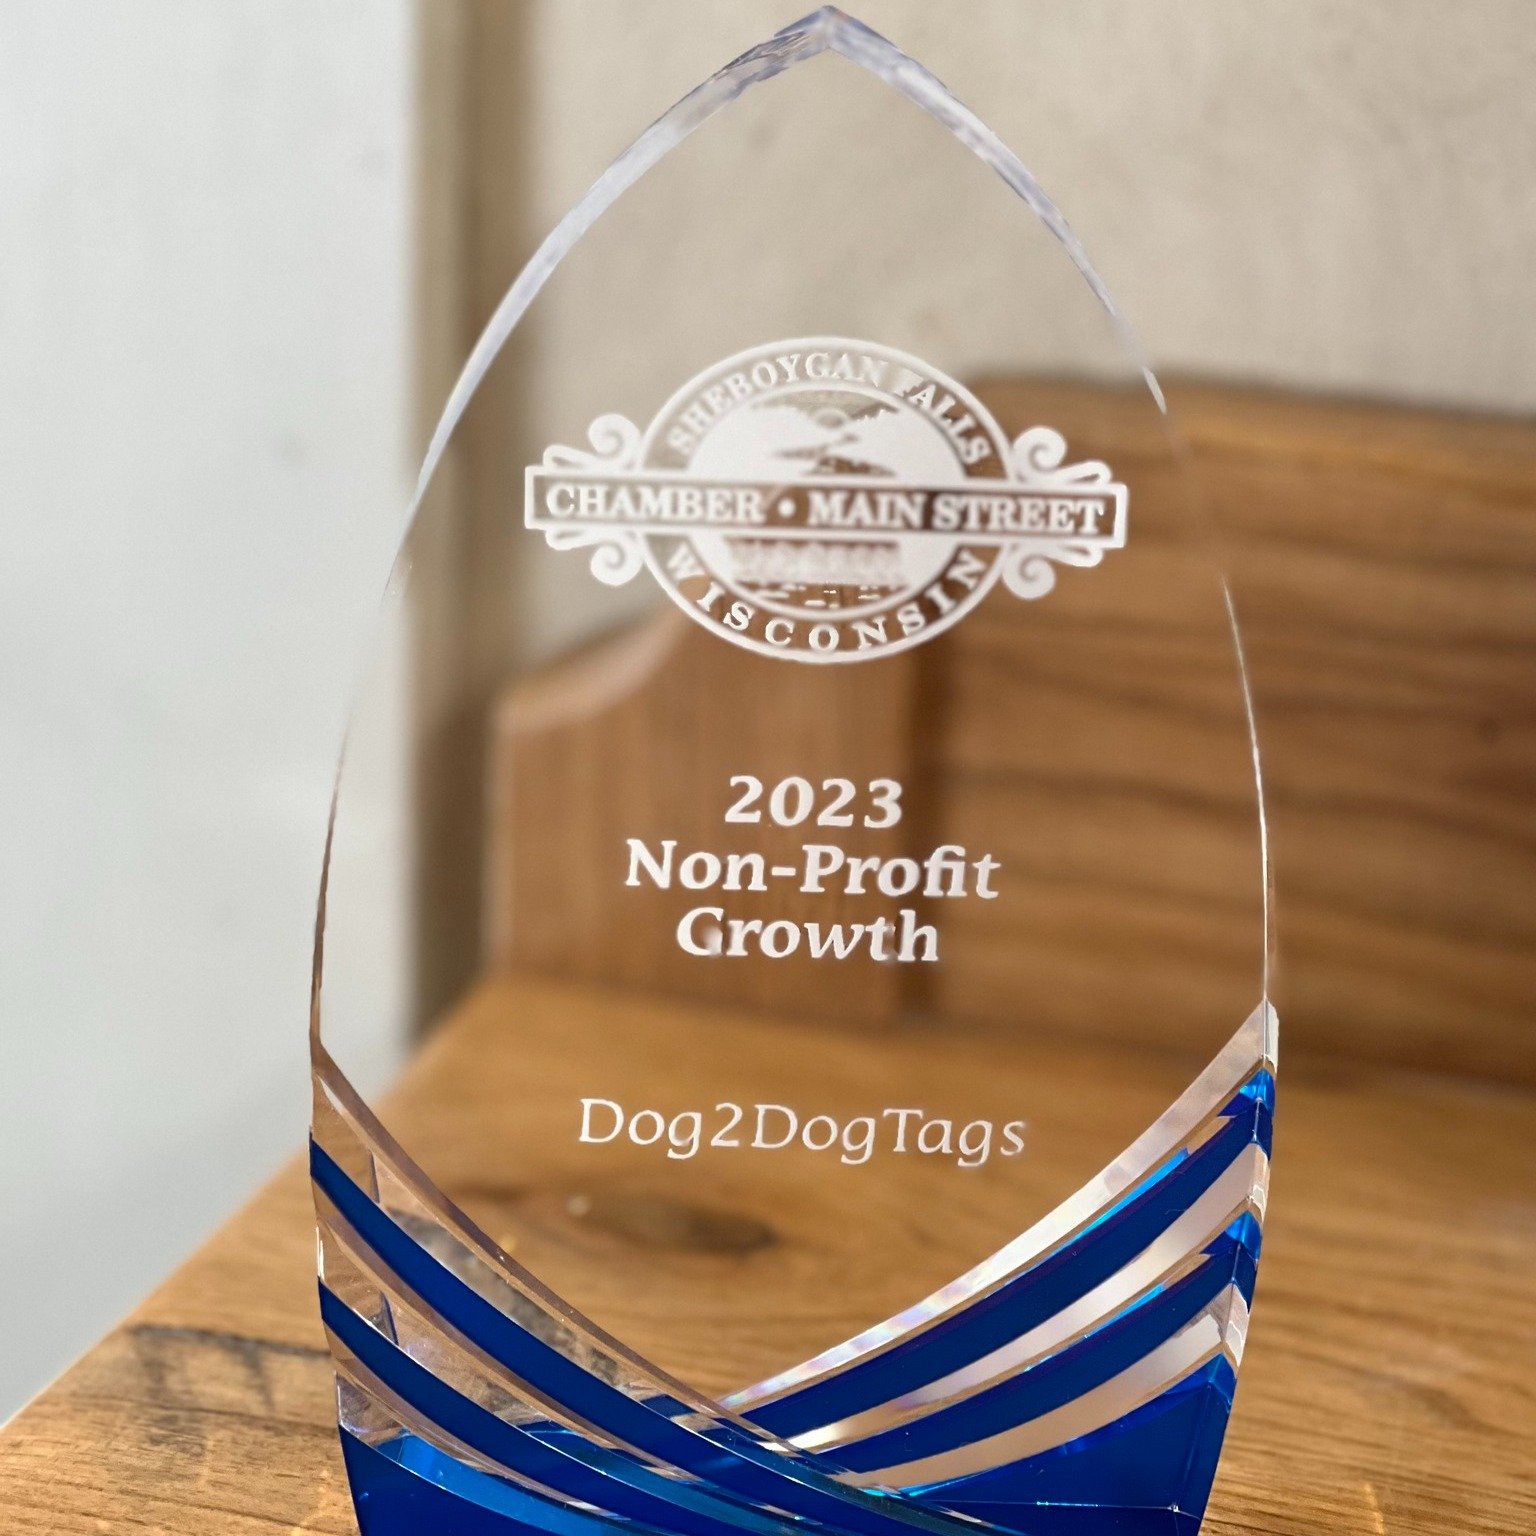 We were honored to receive the 2023 Non-Profit Growth Award from the Sheboygan Falls Chamber-Main Street last night. Thank you to the Chamber, our donors, our volunteers, our communities, and our veteran organization partners across Wisconsin for bel